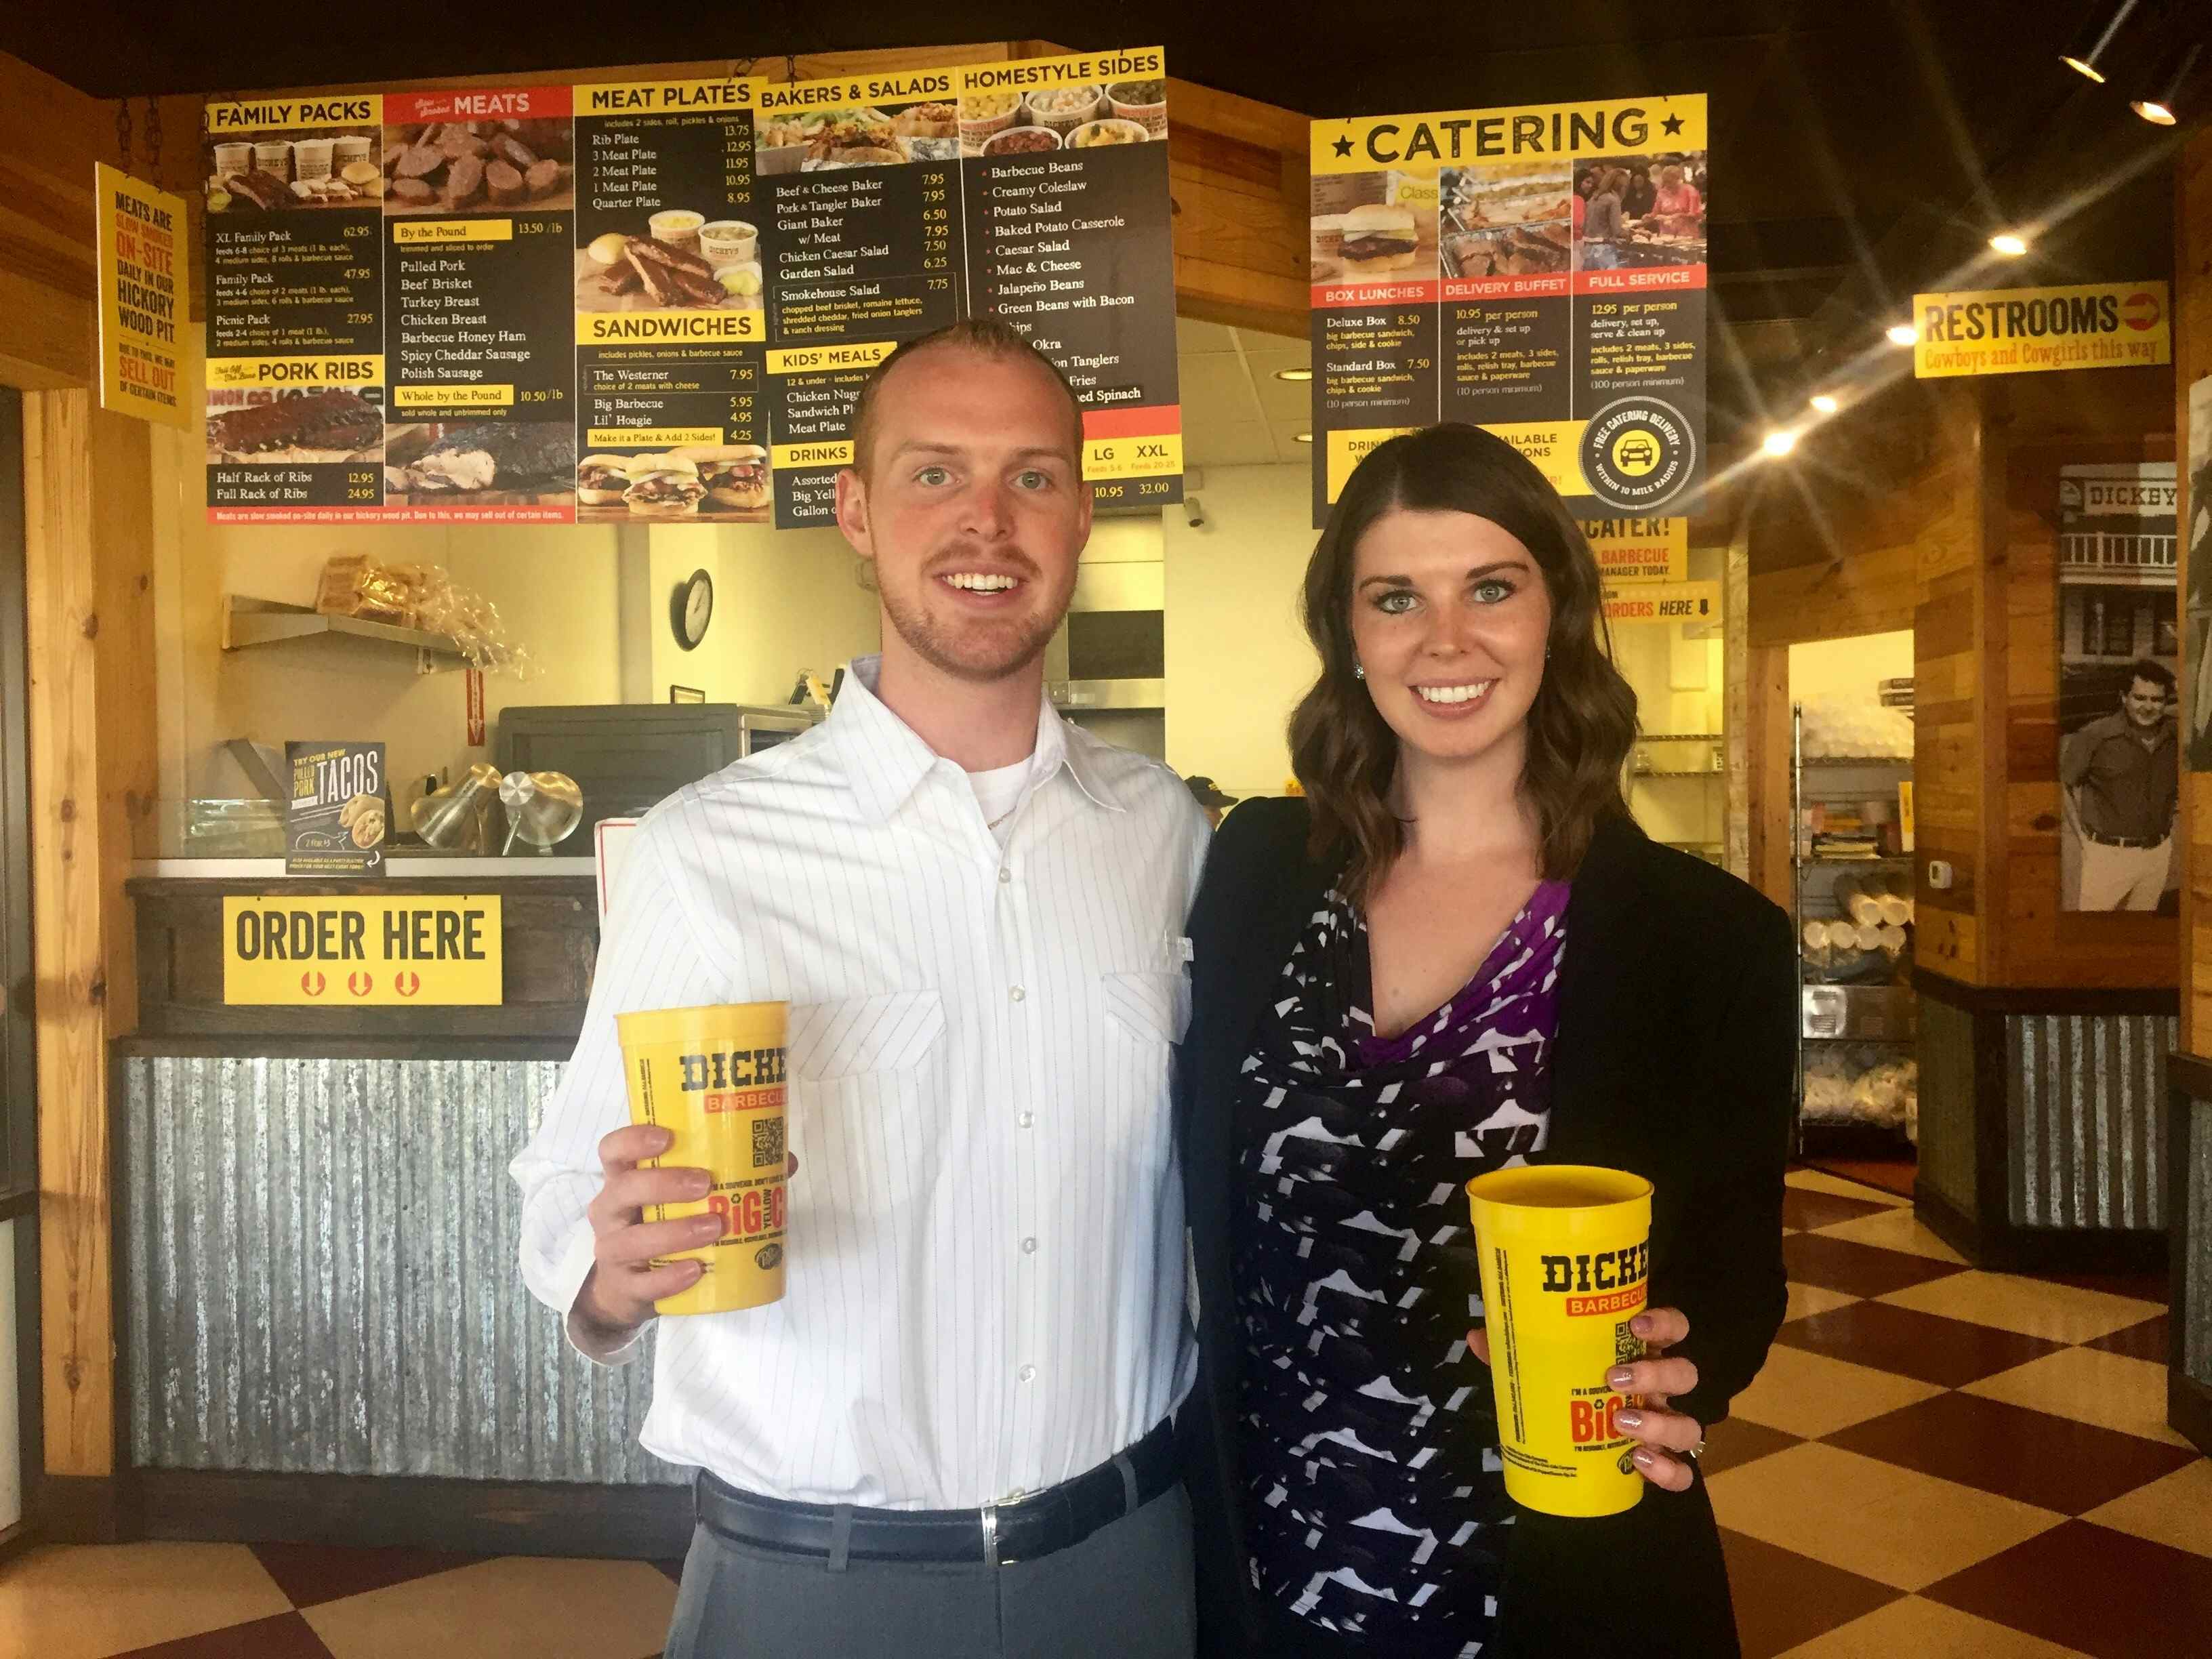 Multi-Concept Franchisee To Open 10 Dickey's Barbecue Pit Locations throughout Arizona